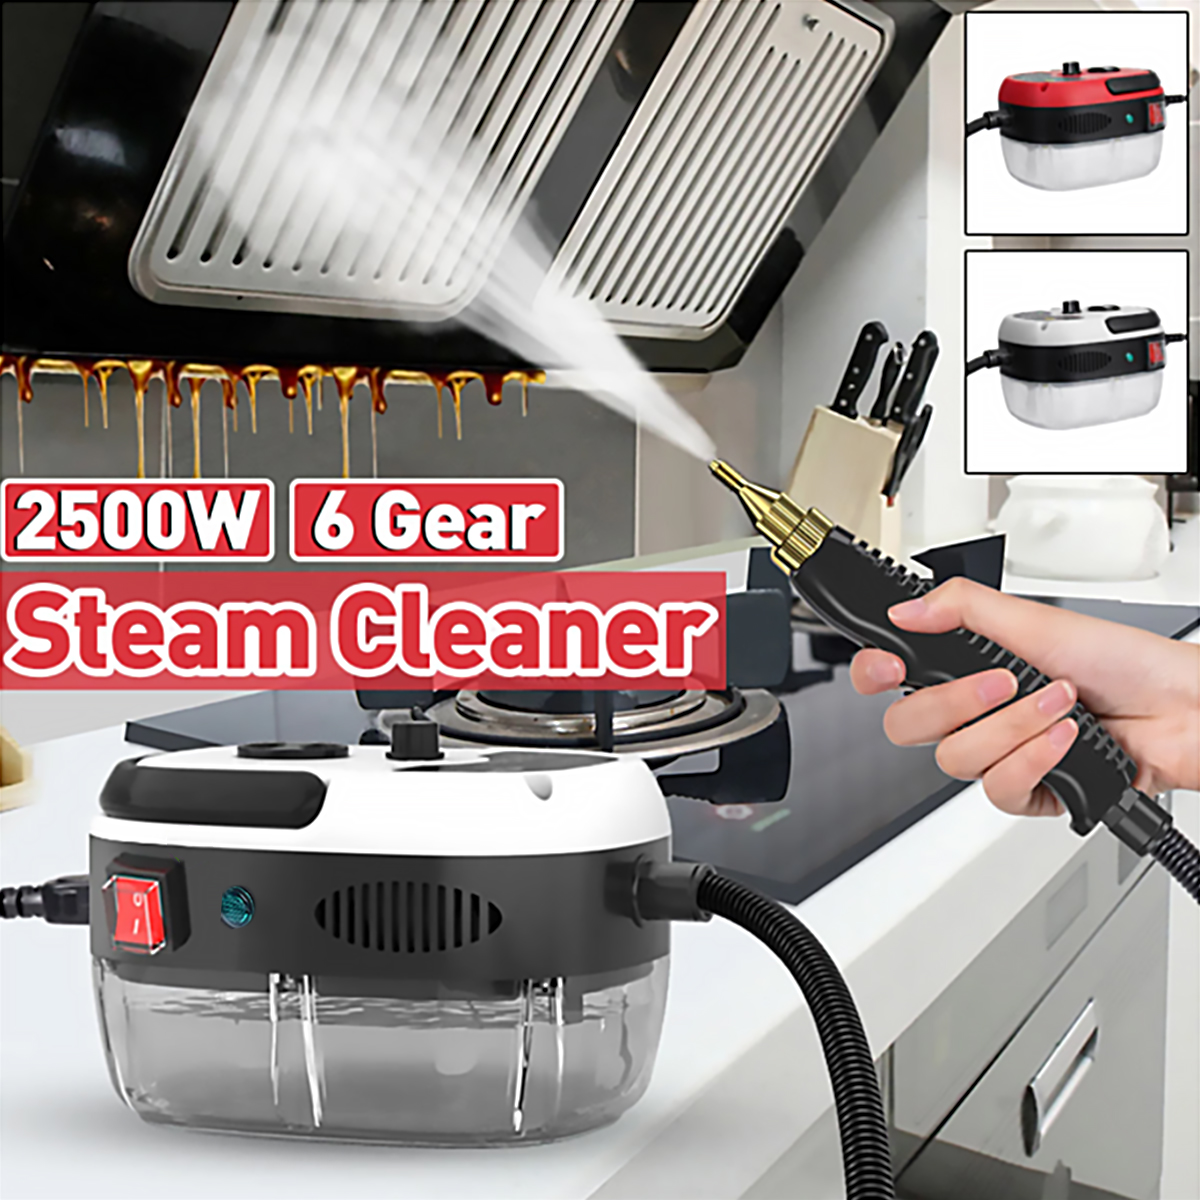 JTWEEN Pressure Steam Cleaner,Handheld High Temp Portable Cleaning Machine  Steamer for cleaning for Home Use Grout Tile Car Detailing Kitchen